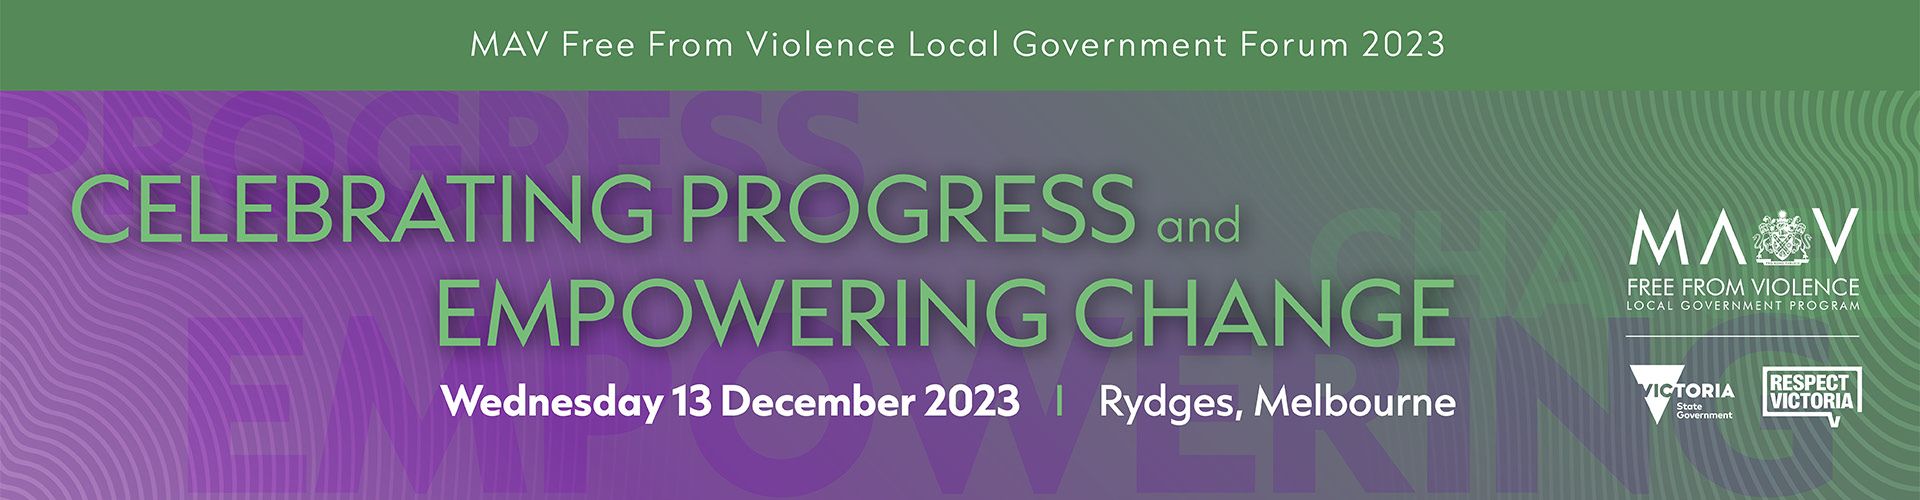 Free from Violence Local Government Forum 2023 Image